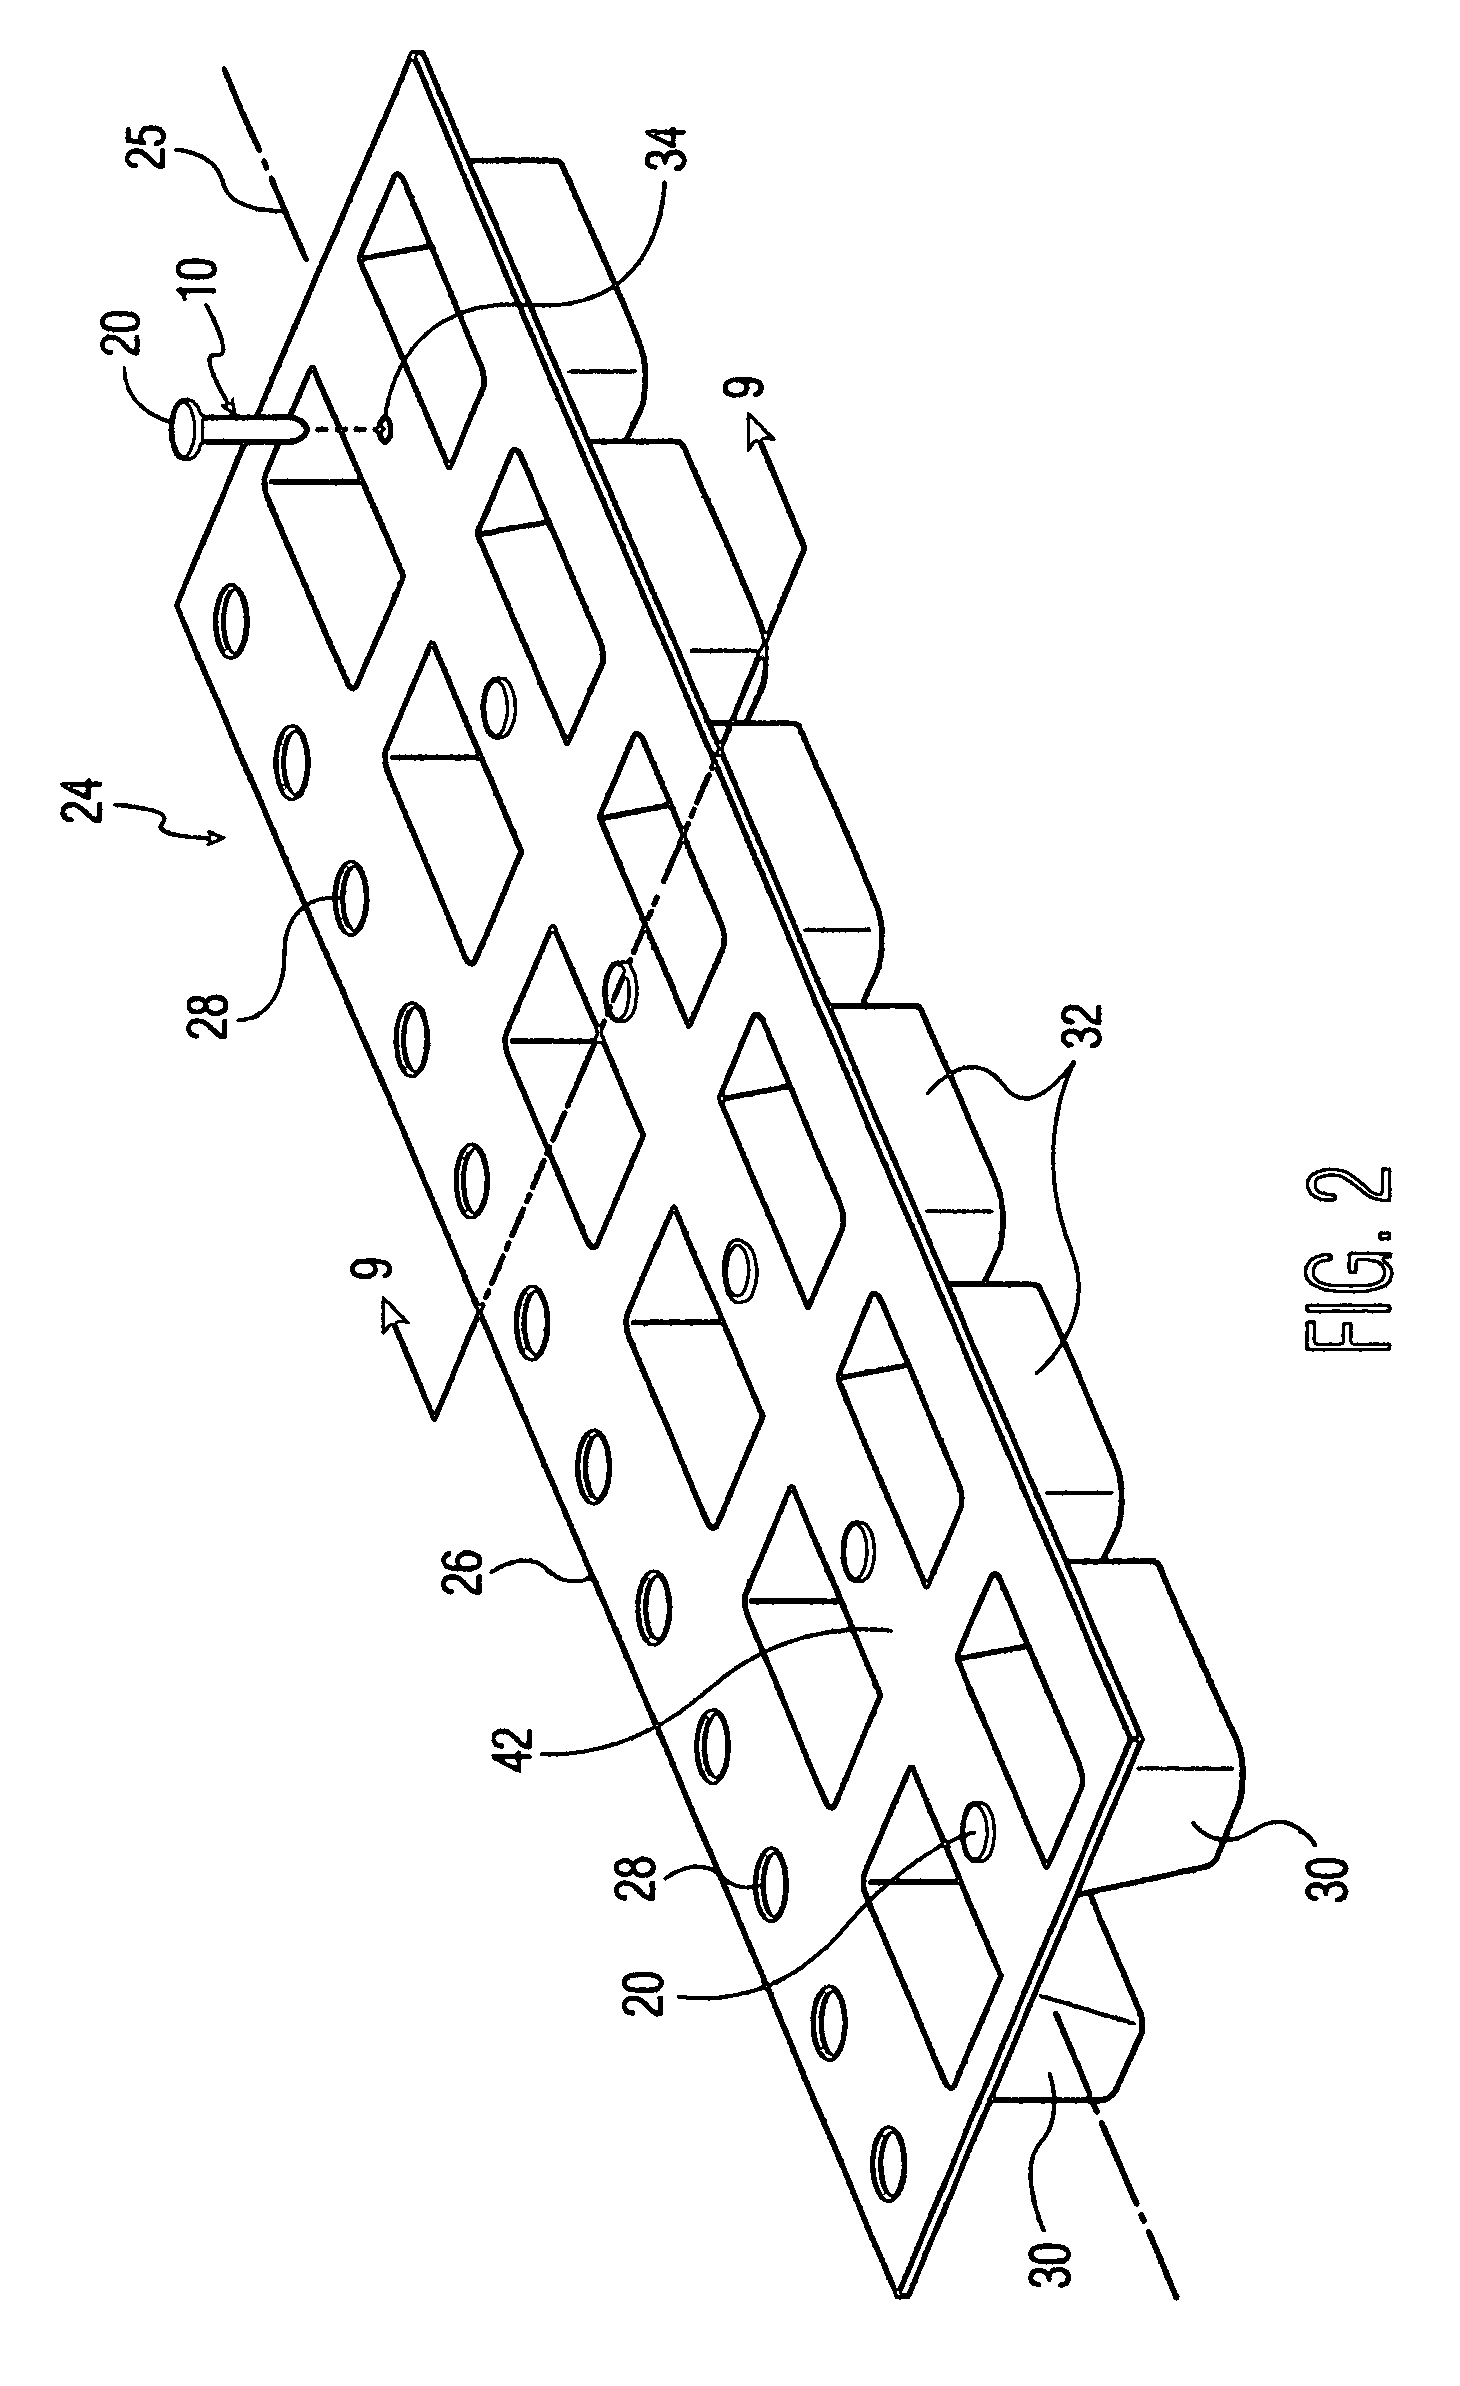 Tape-packaged headed pin contact